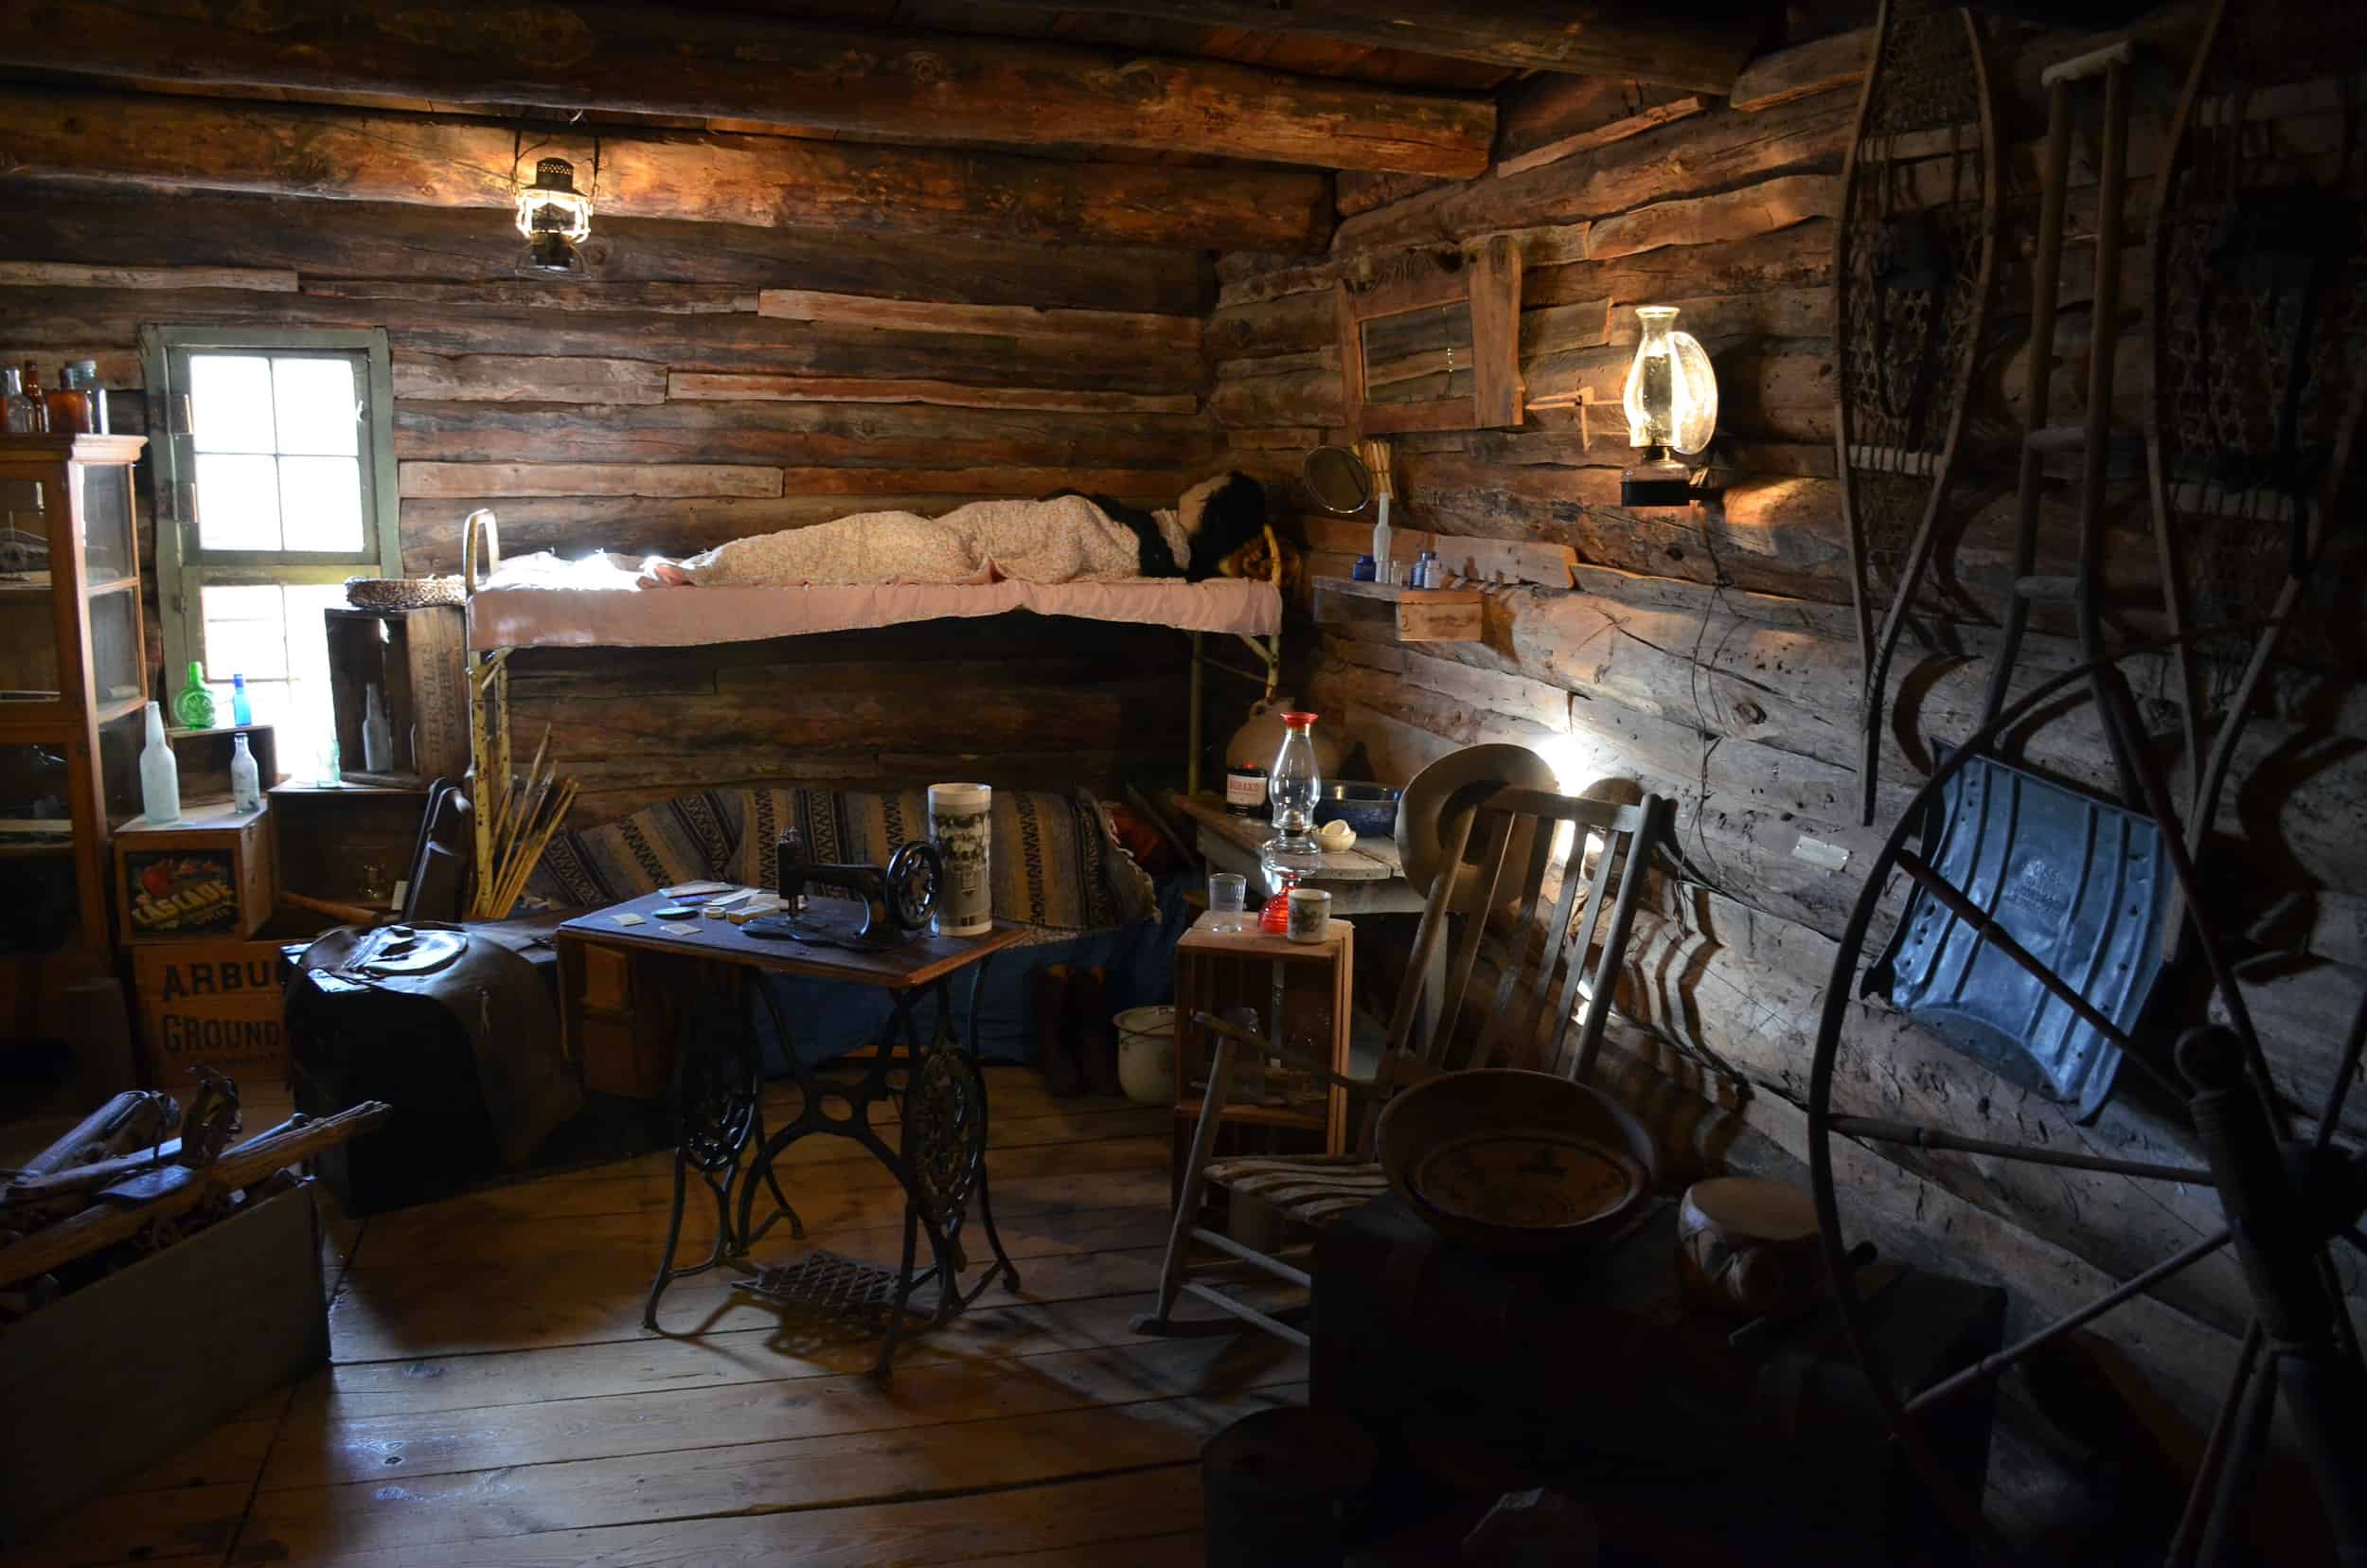 Hardcastle Cabin at the Geronimo Springs Museum in Truth or Consequences, New Mexico